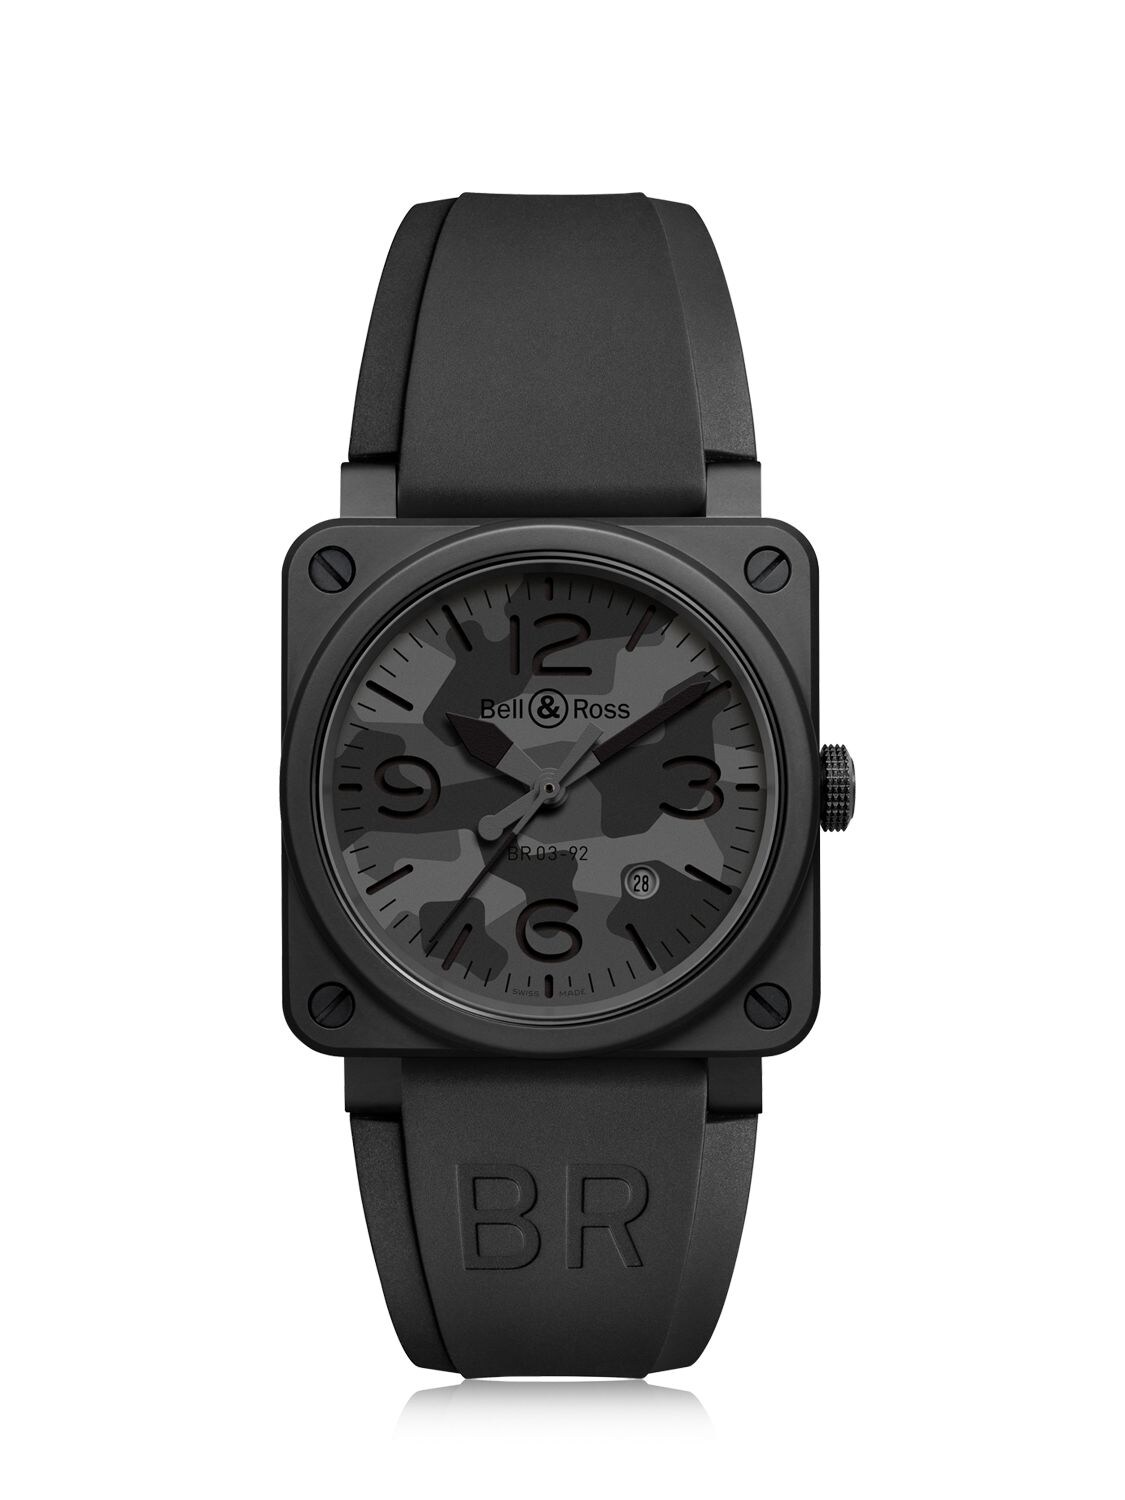 BELL & ROSS CAMOUFLAGE CERAMIC AUTOMATIC WATCH,67I9MF007-R1JFWQ2